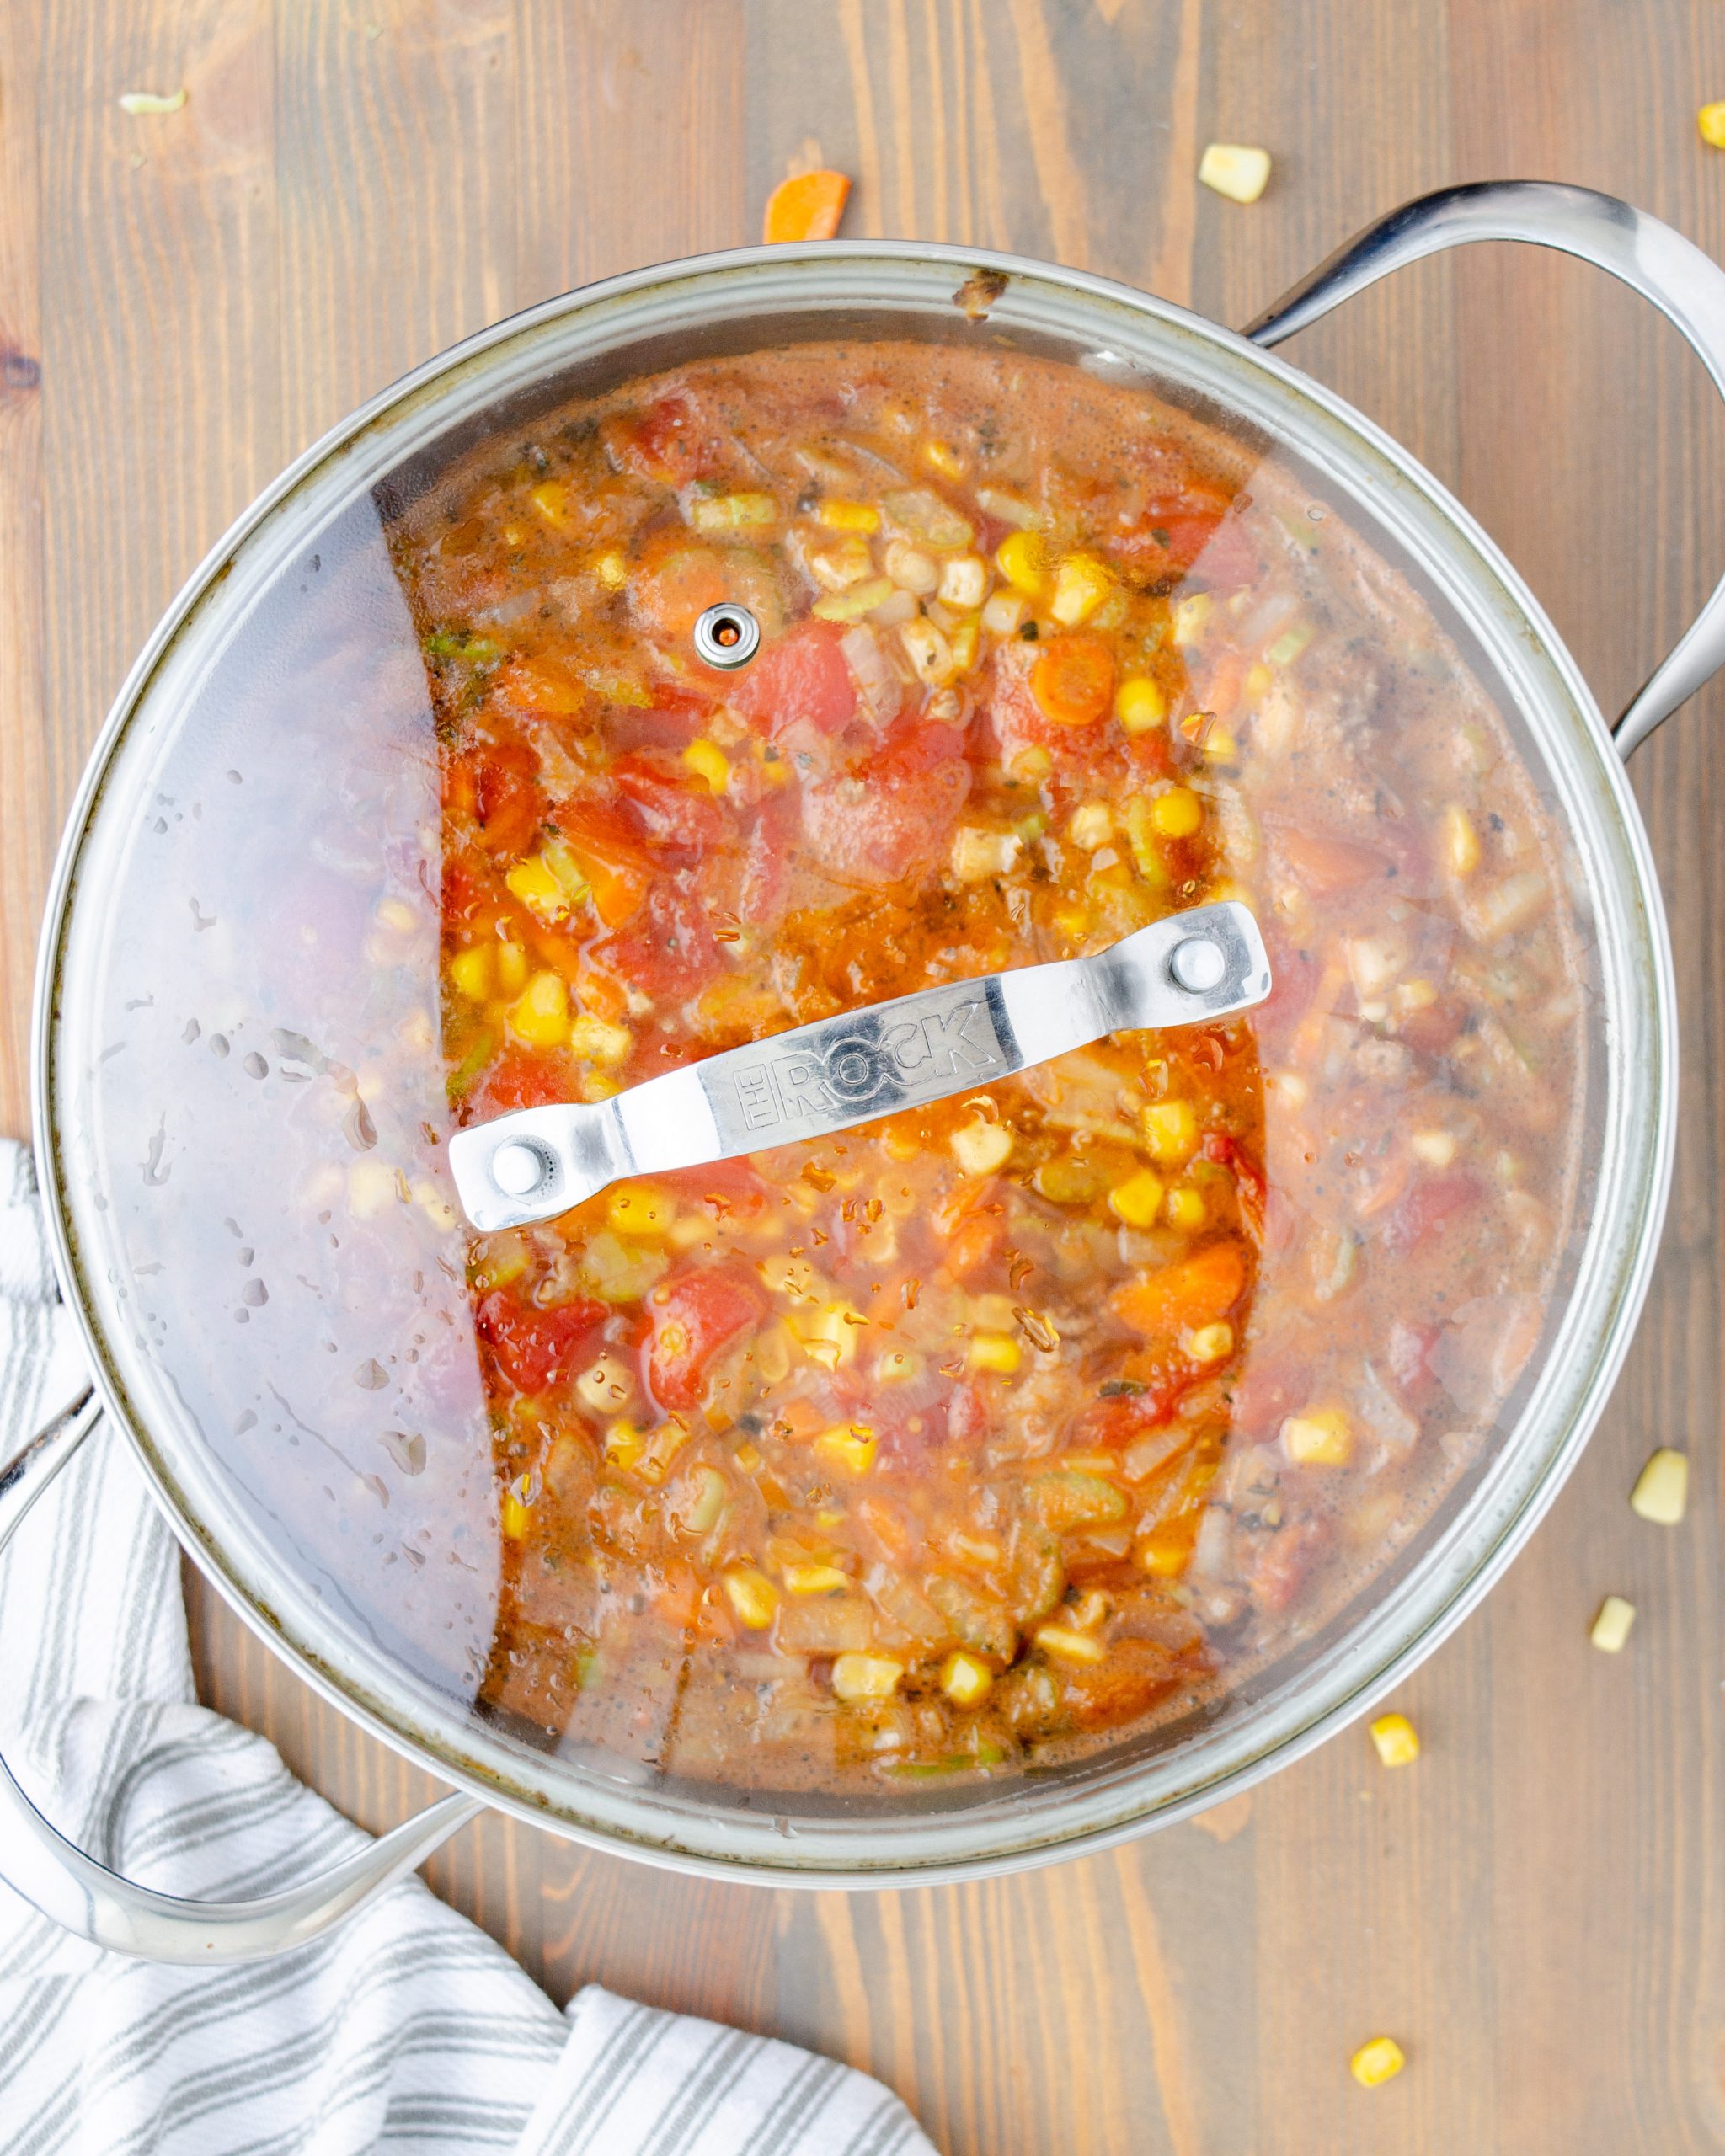 Reduce the heat to a simmer, cover, and cook on low for 1 ½ hour.